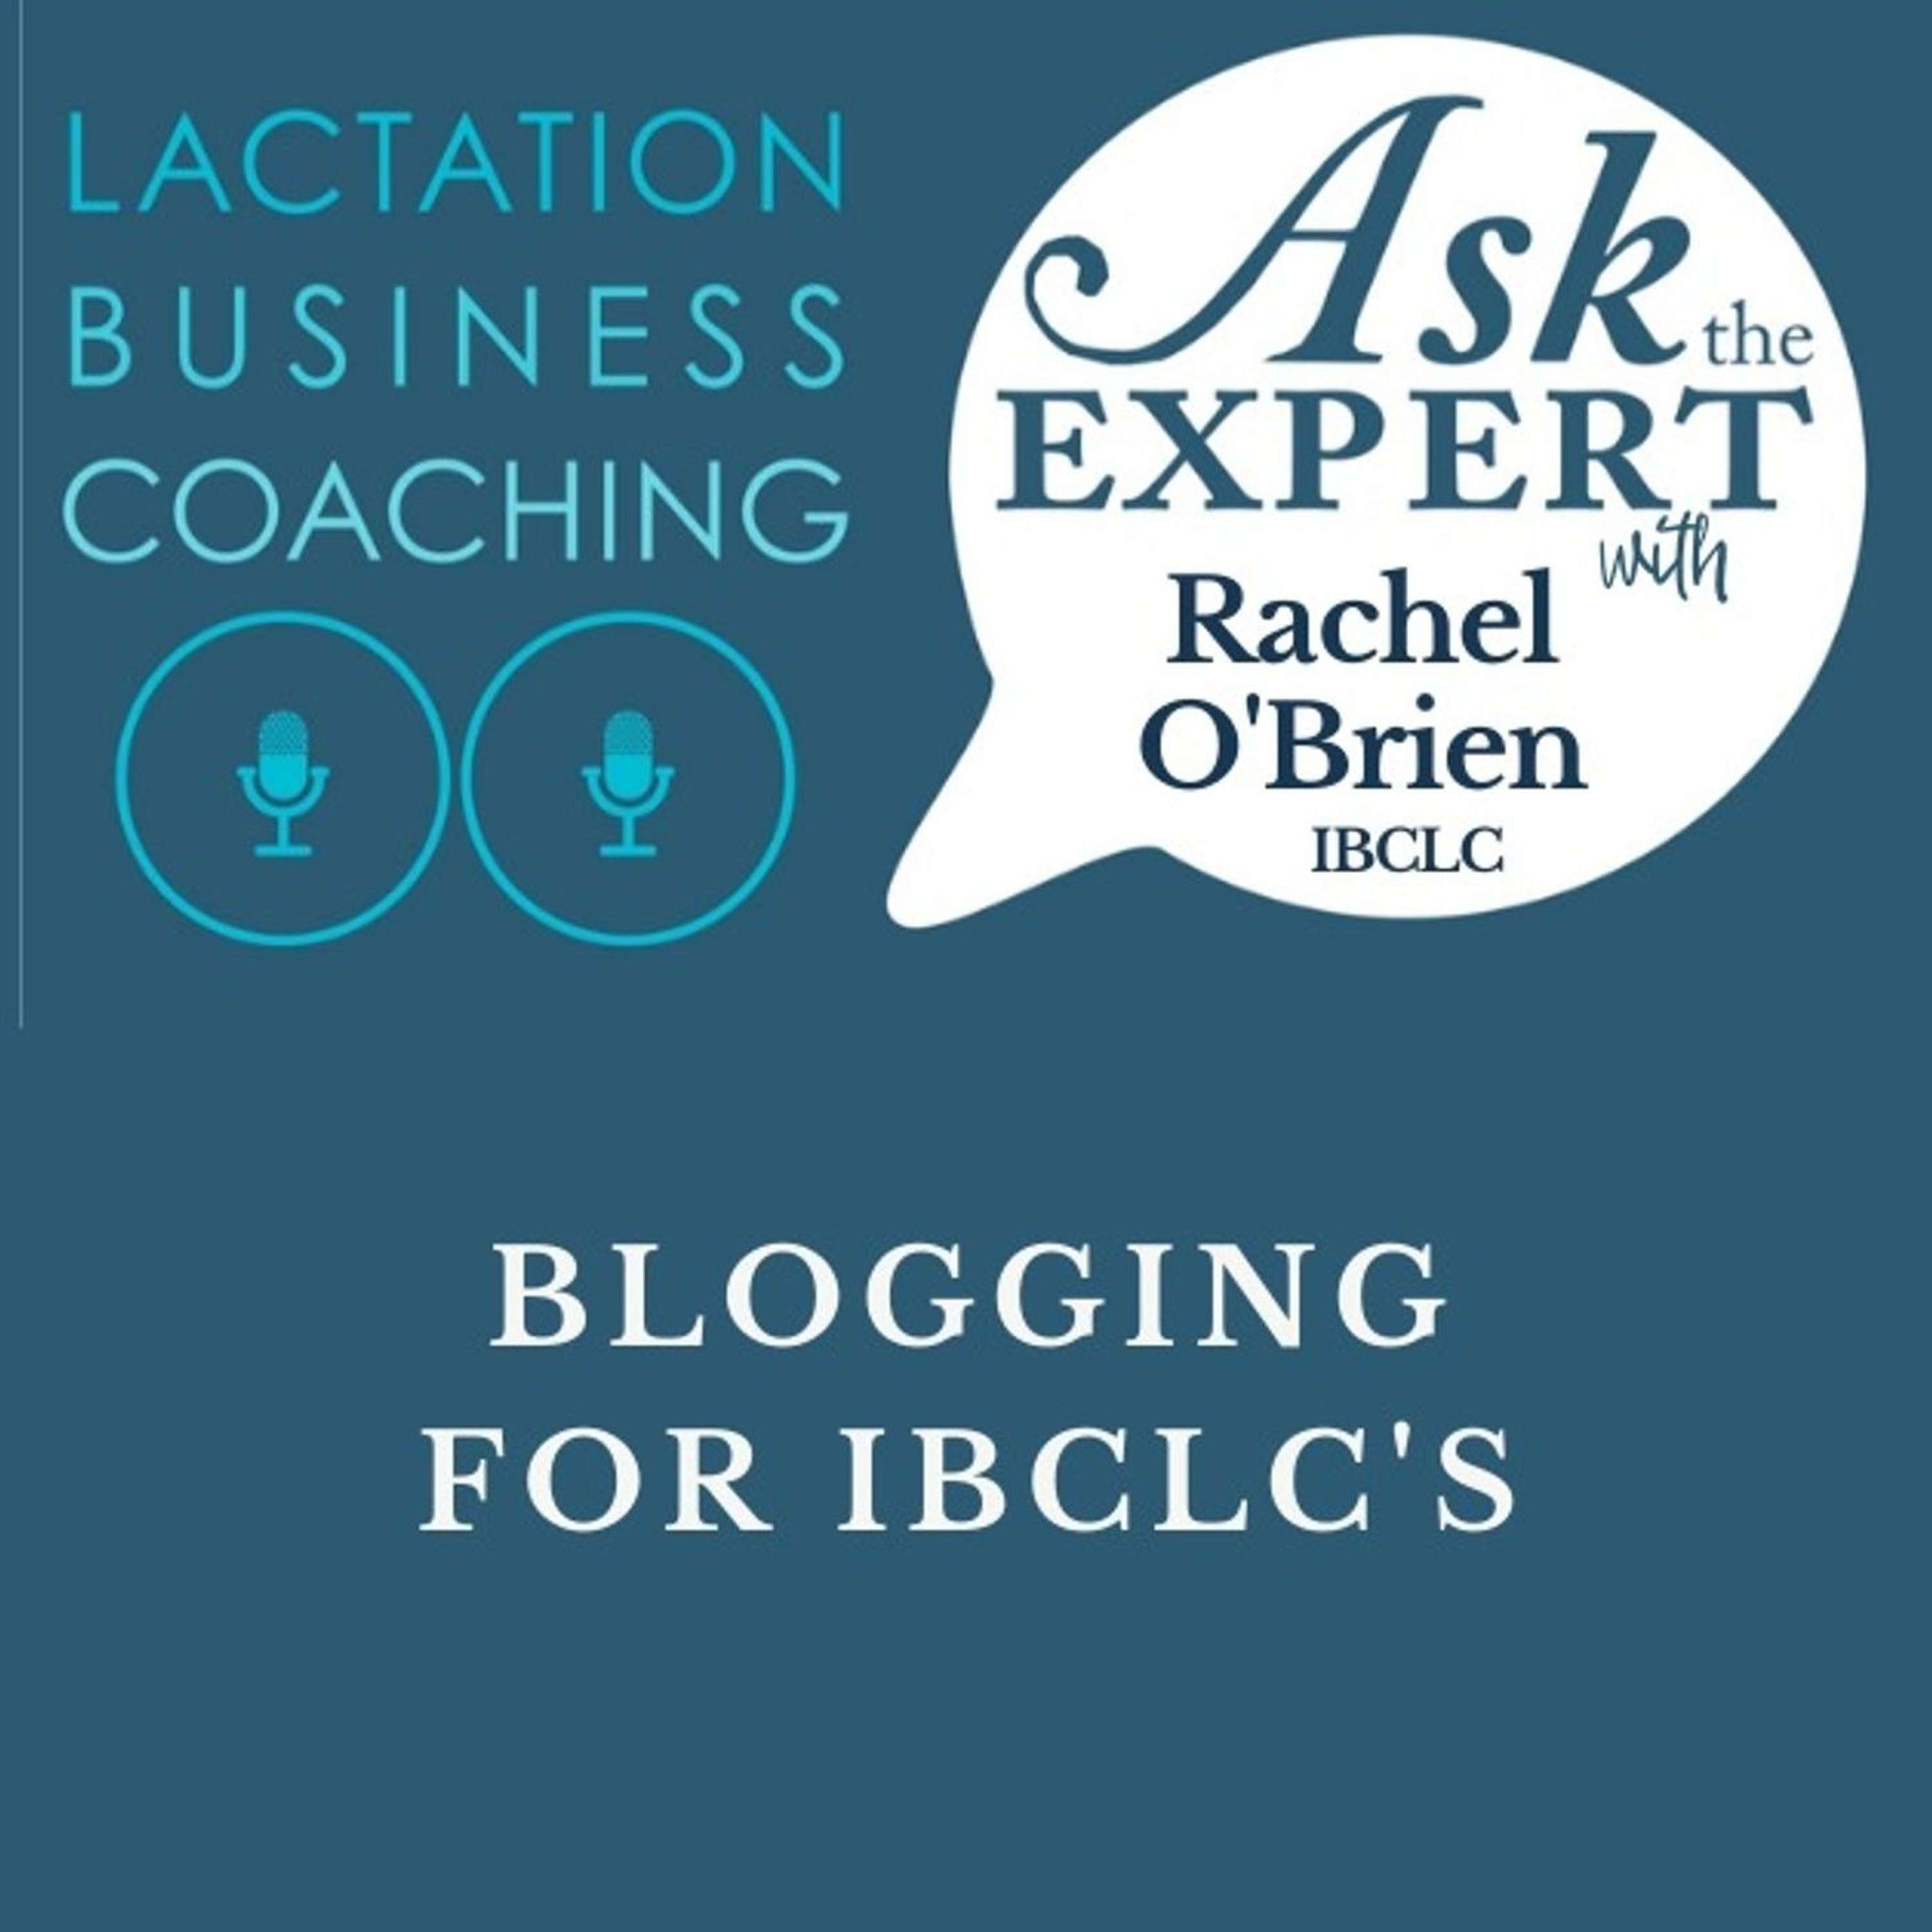 Blogging for IBCLC’s with Rachel O'Brien, IBCLC [BONUS: ASK THE EXPERT]